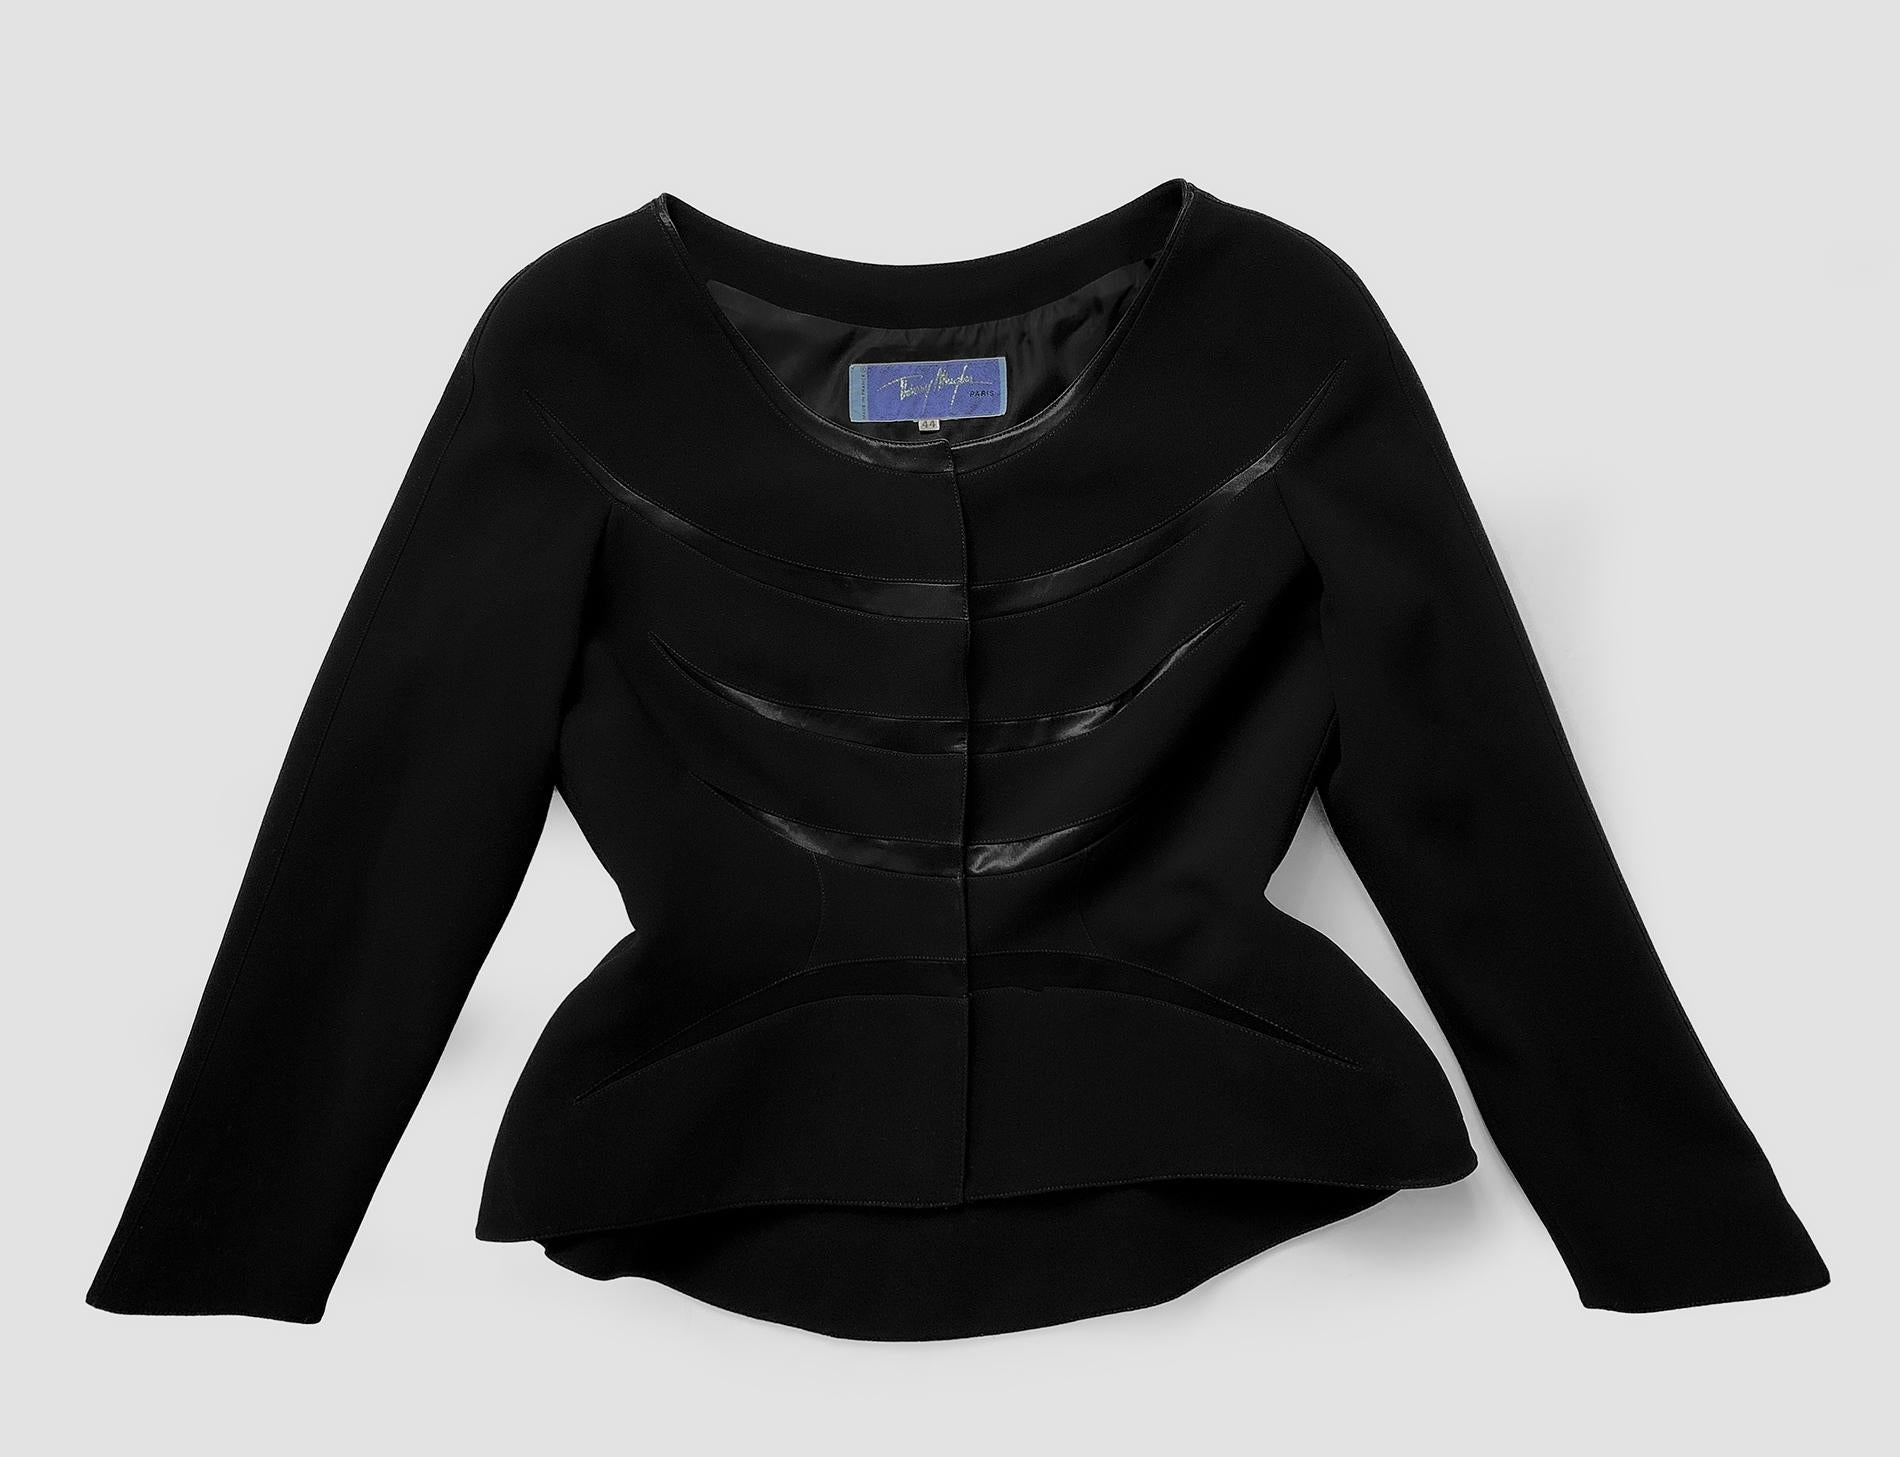 Thierry Mugler SS 2000 Black Jacket Blazer Fitted Fabulous  For Sale 2